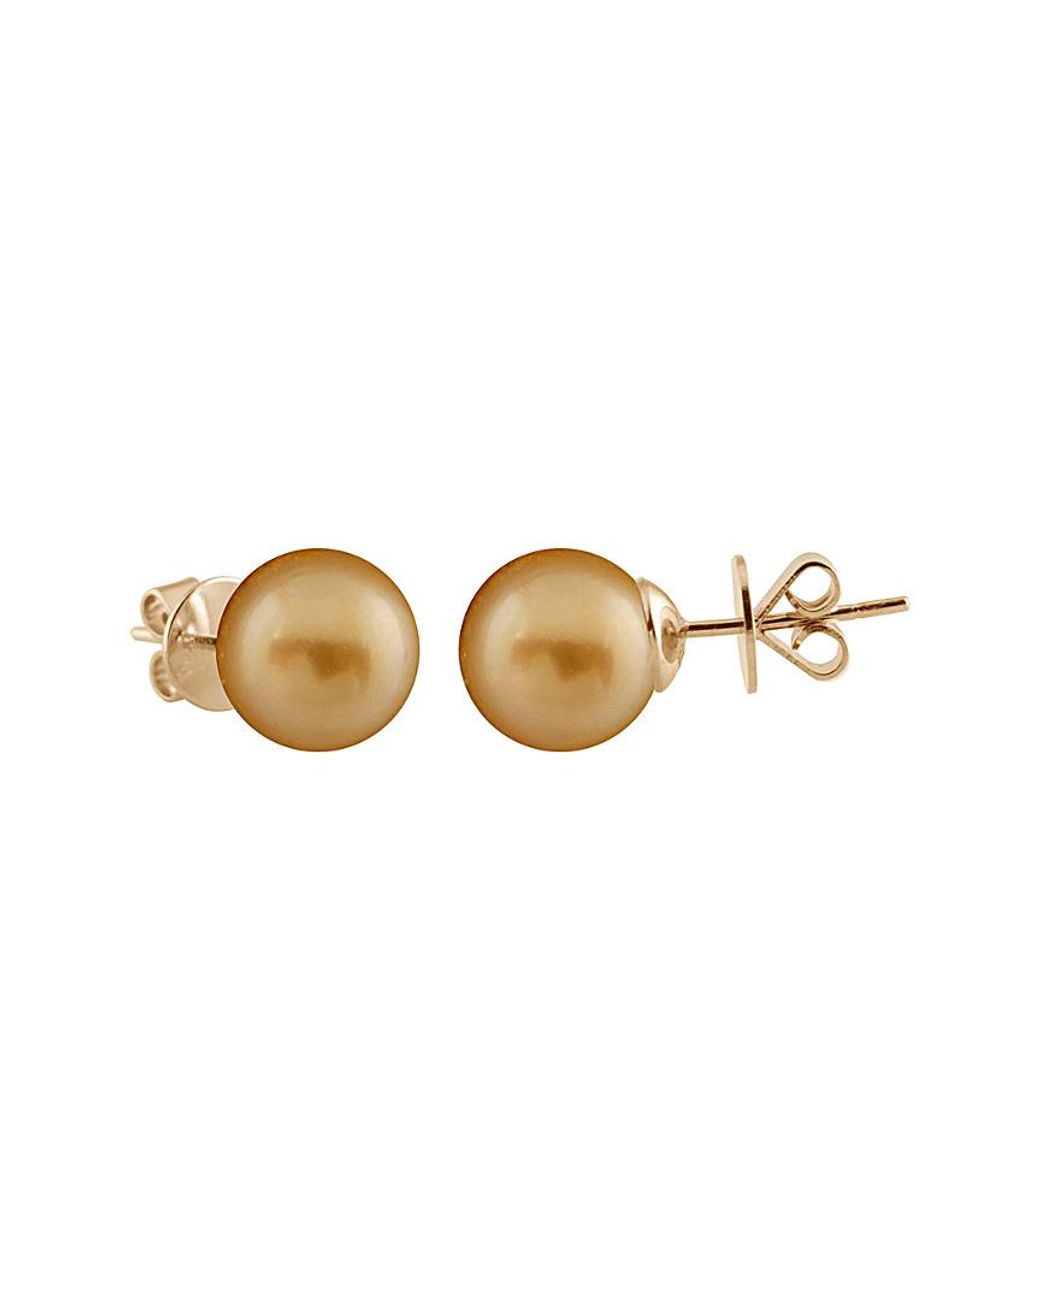 new pair of 10-11mm south sea round white pearl earring 14k